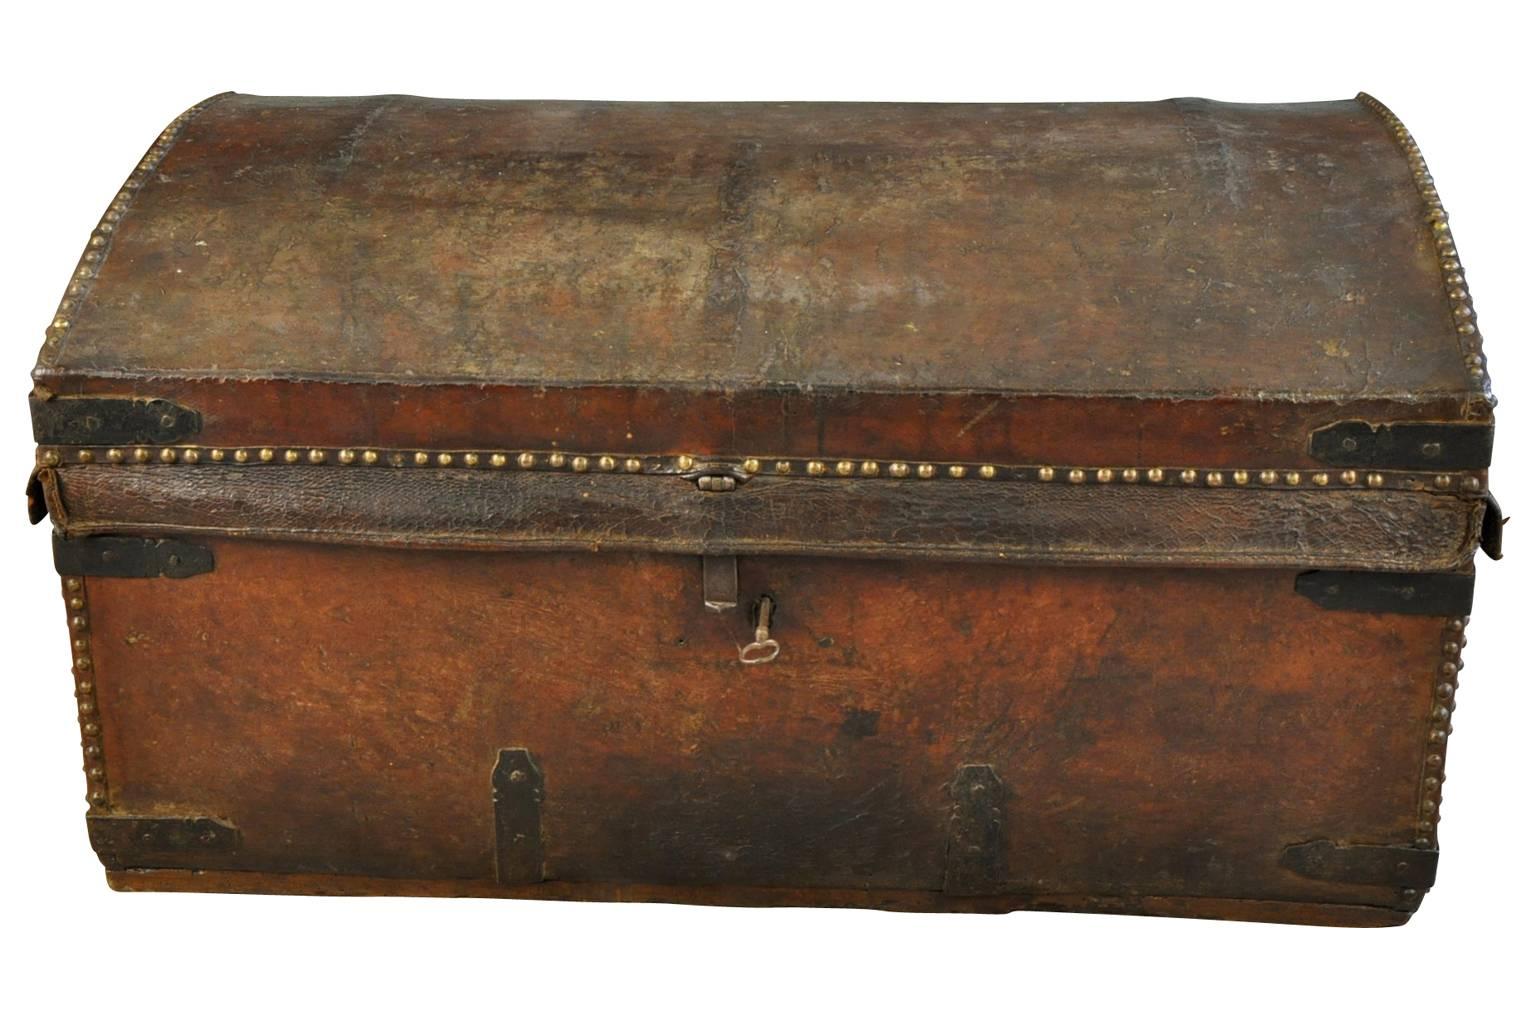 A very handsome mid-19th century trunk, malle from Northern Italy. Wonderfully constructed from leather with iron bindings. Terrific patina.